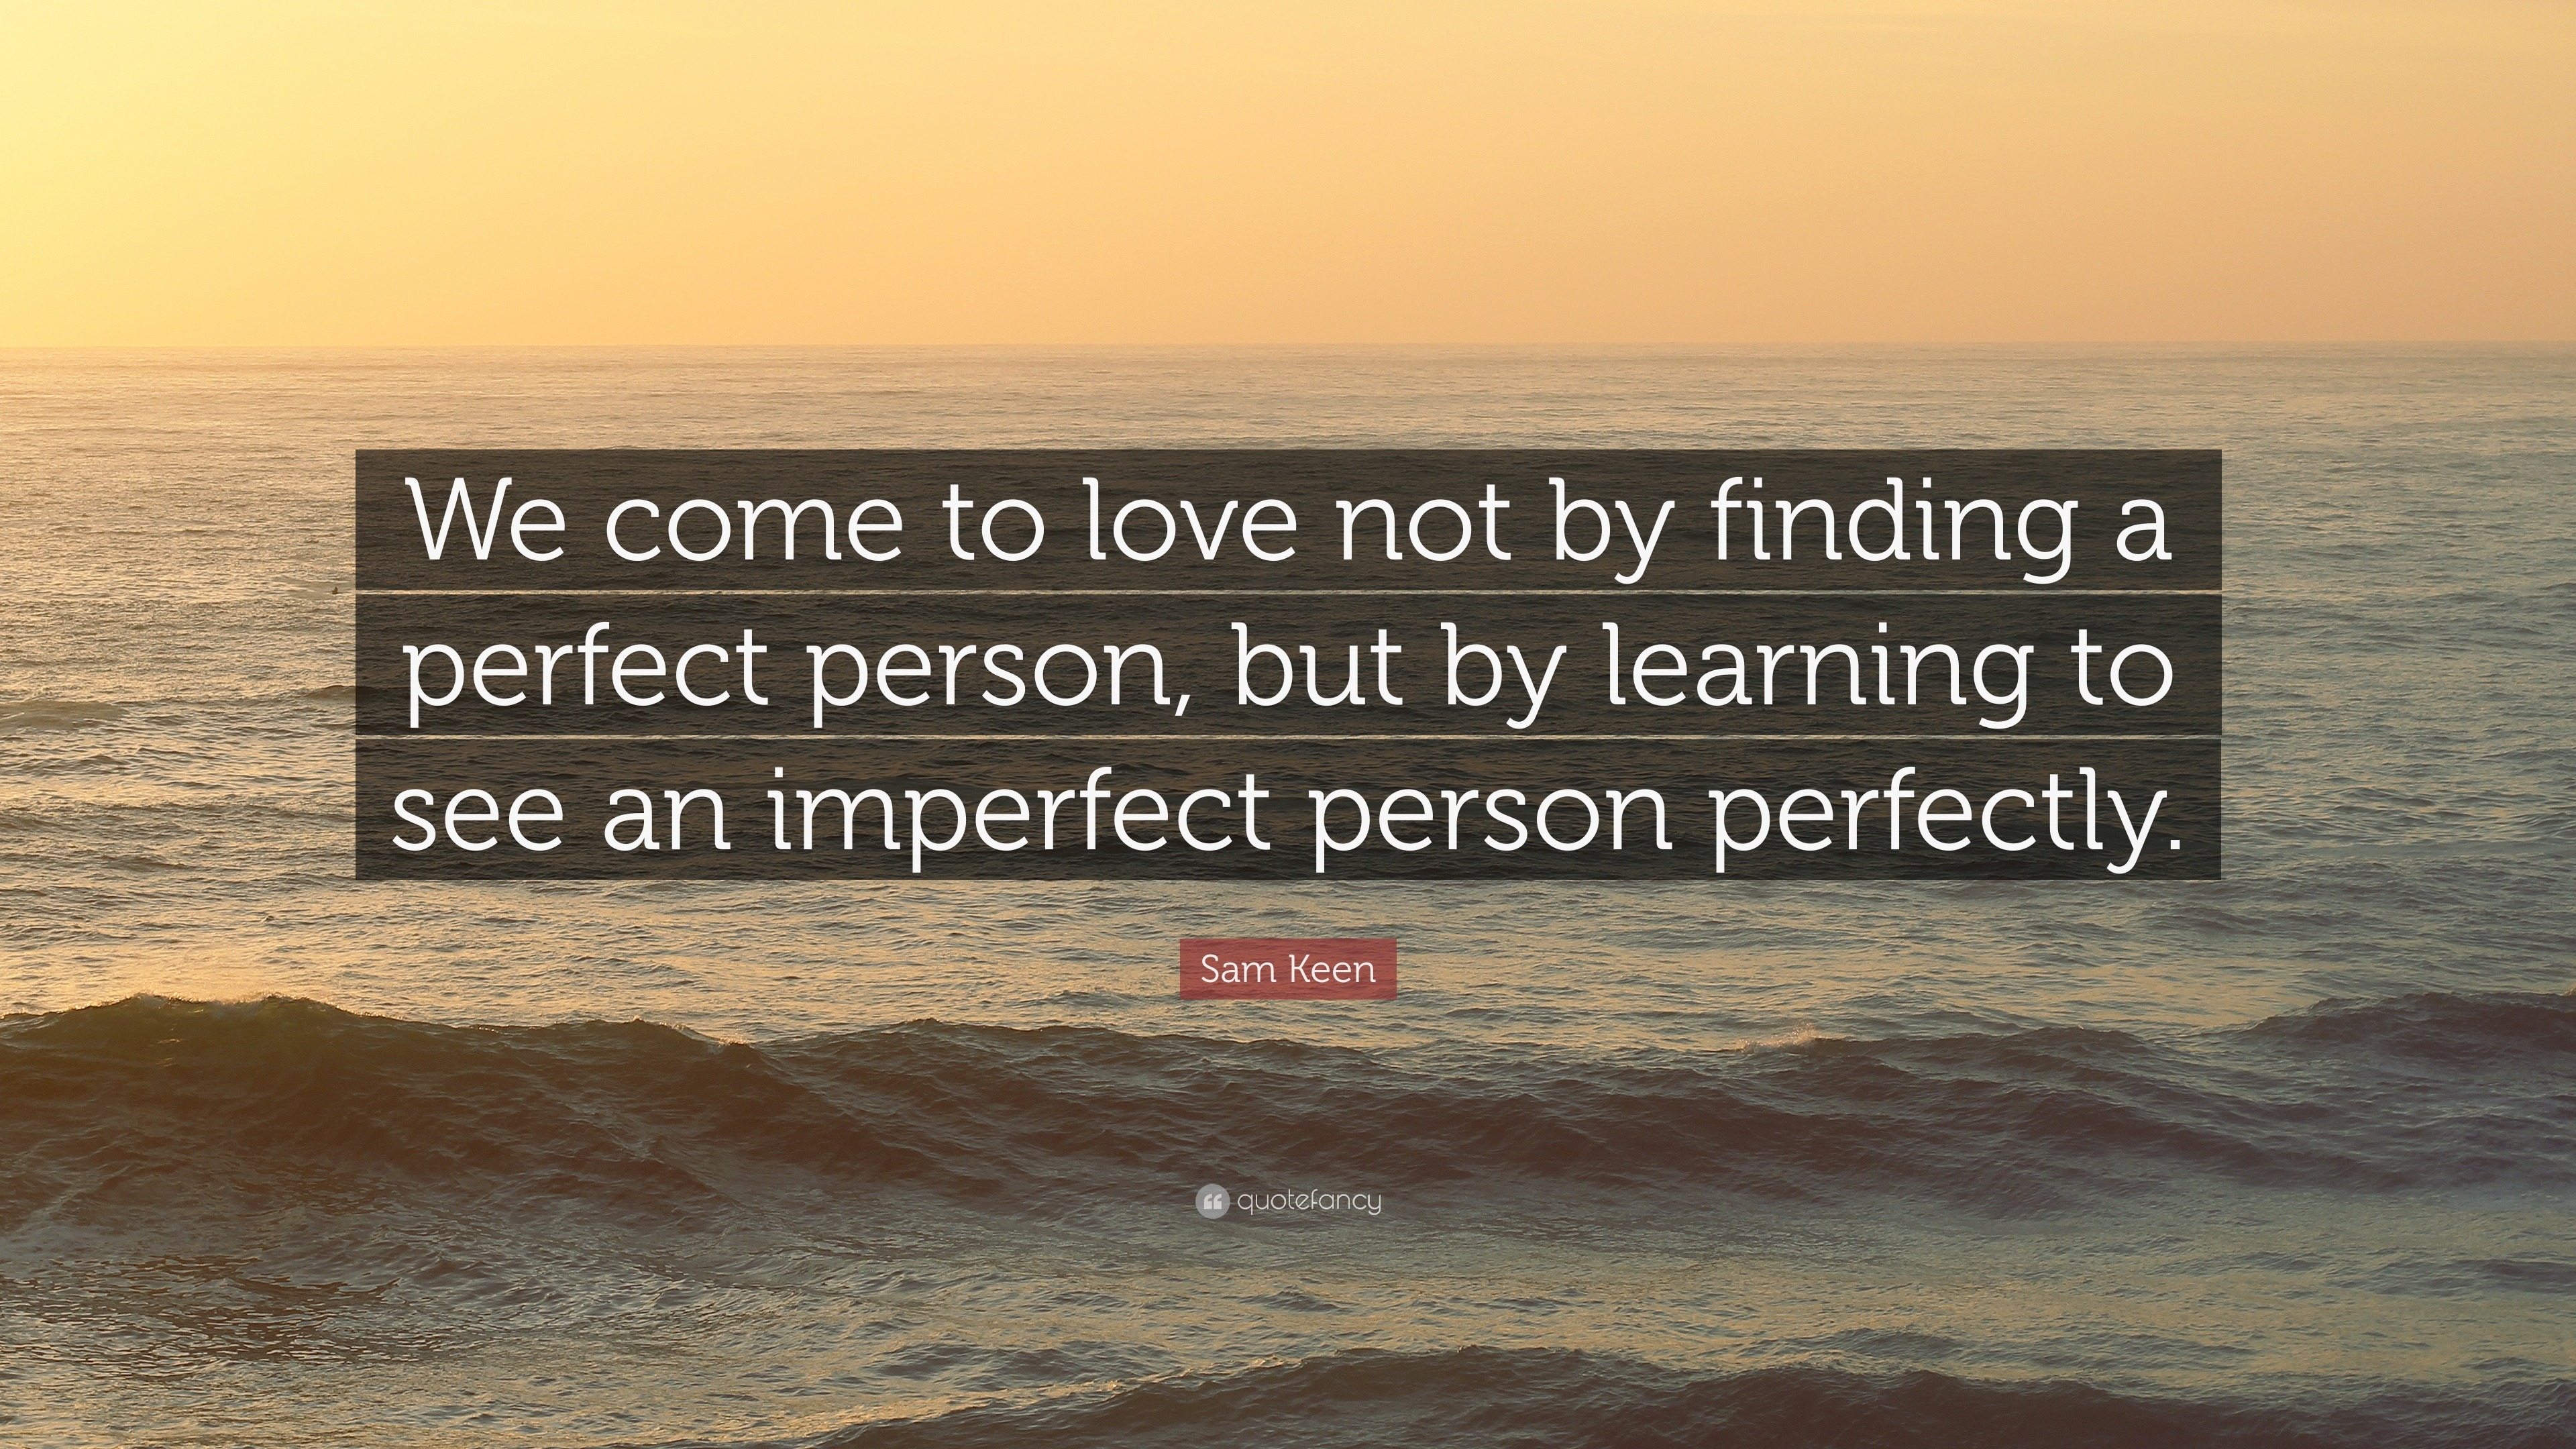 Sam Keen Quote: “We come to love not by finding a perfect person, but by  learning